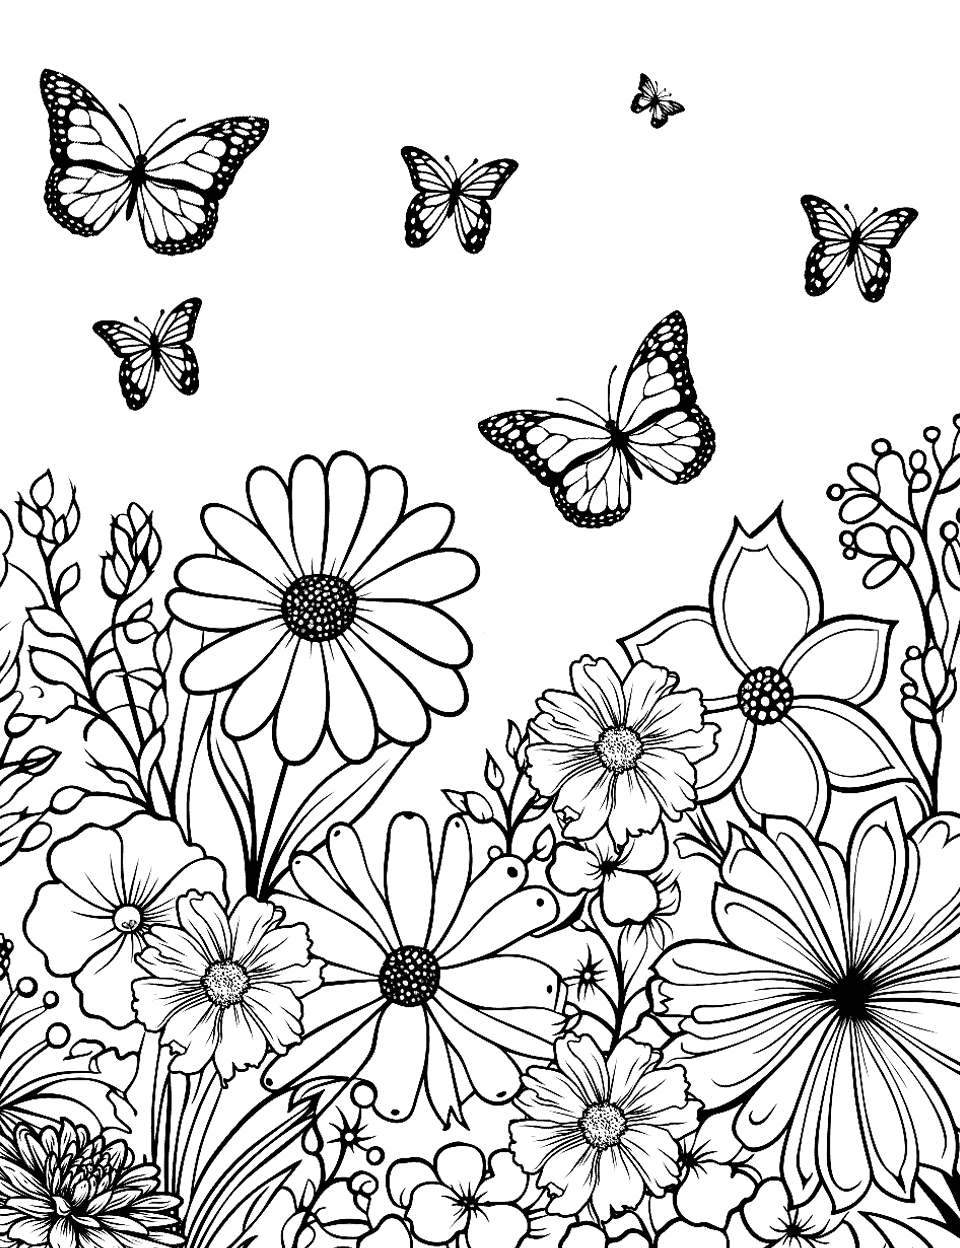 Spring Garden Bliss Coloring Page - A garden full of spring flowers, with butterflies flying around.